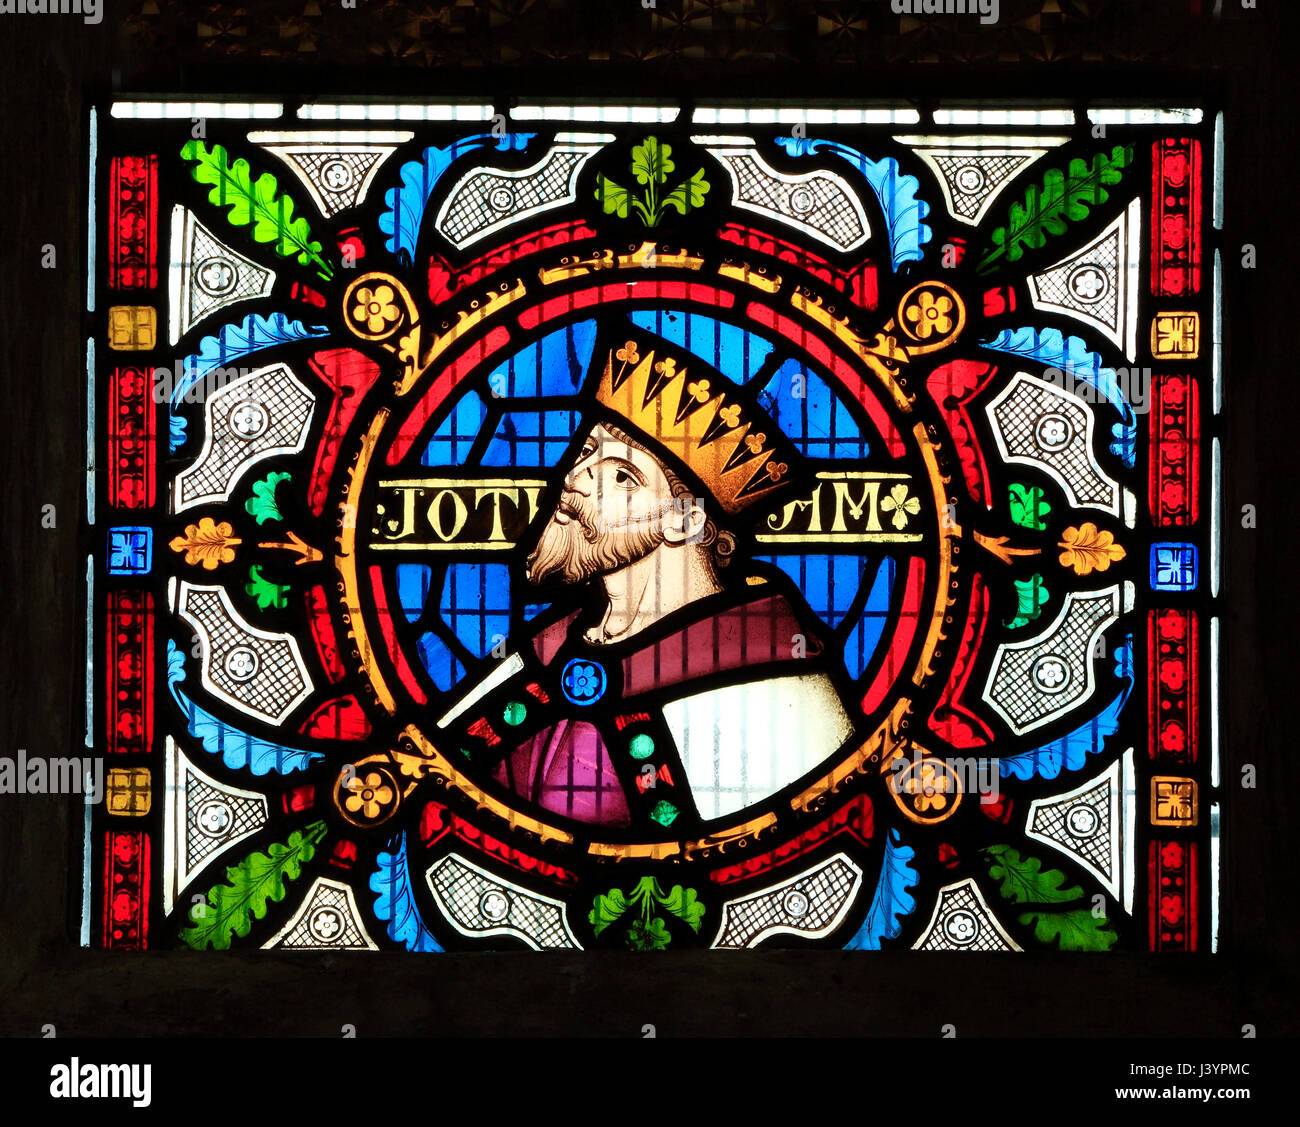 Jotham, King of Judah, detail from Story of Ruth, stained glass window by Robert Bayne of Heaton, Butler & Bayne, 1862, Sculthorpe, Norfolk England UK Stock Photo